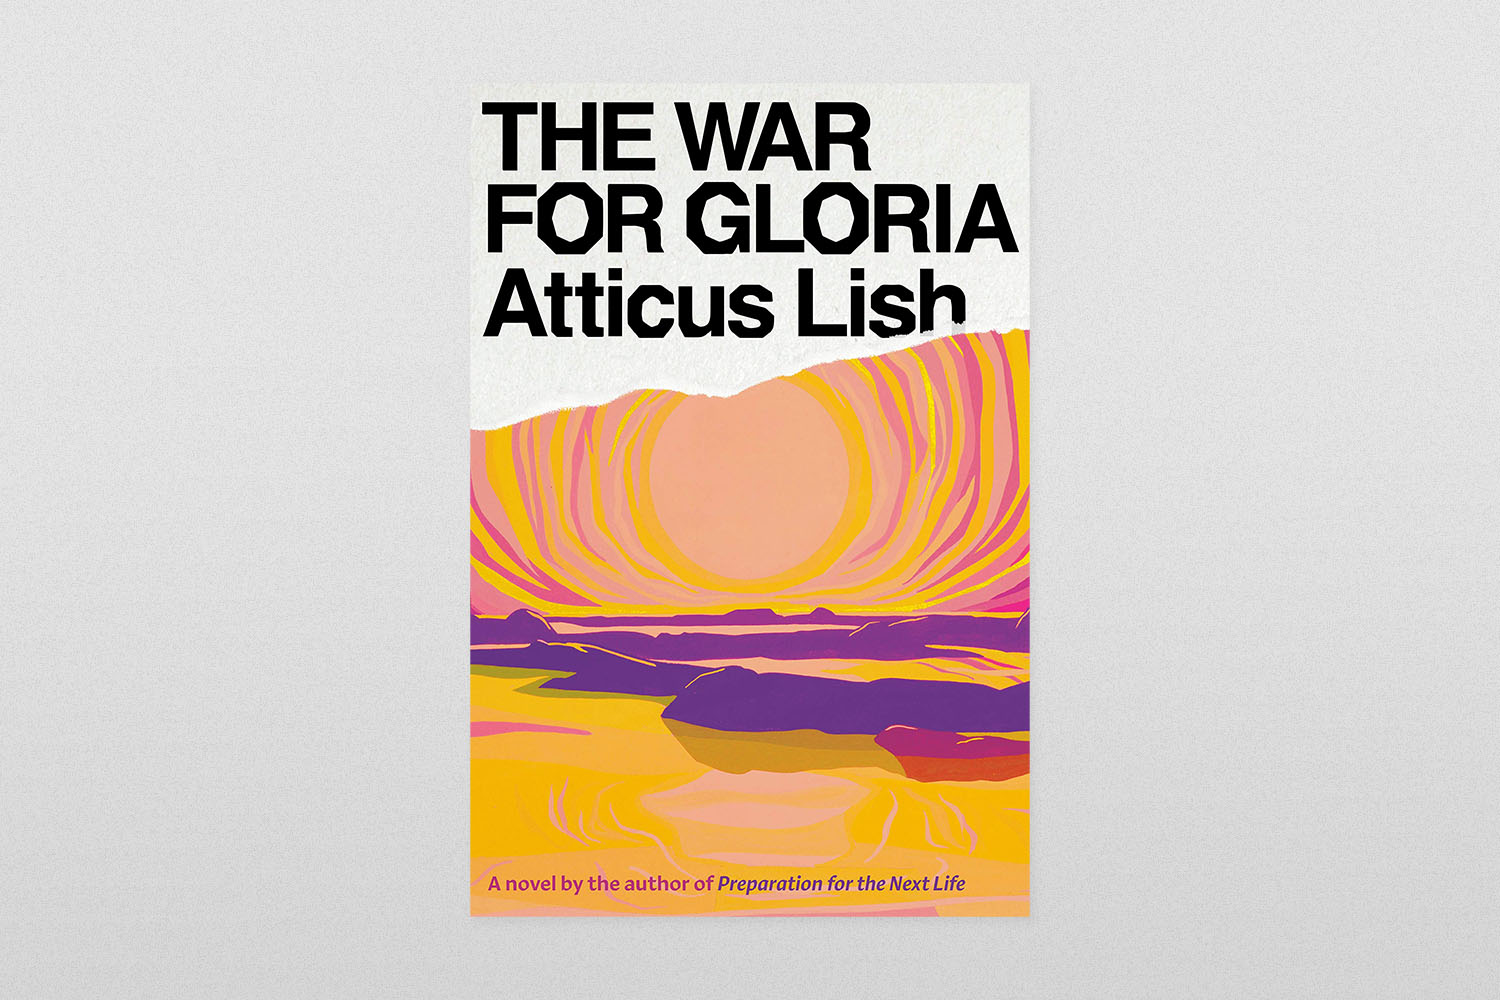 "The War for Gloria"